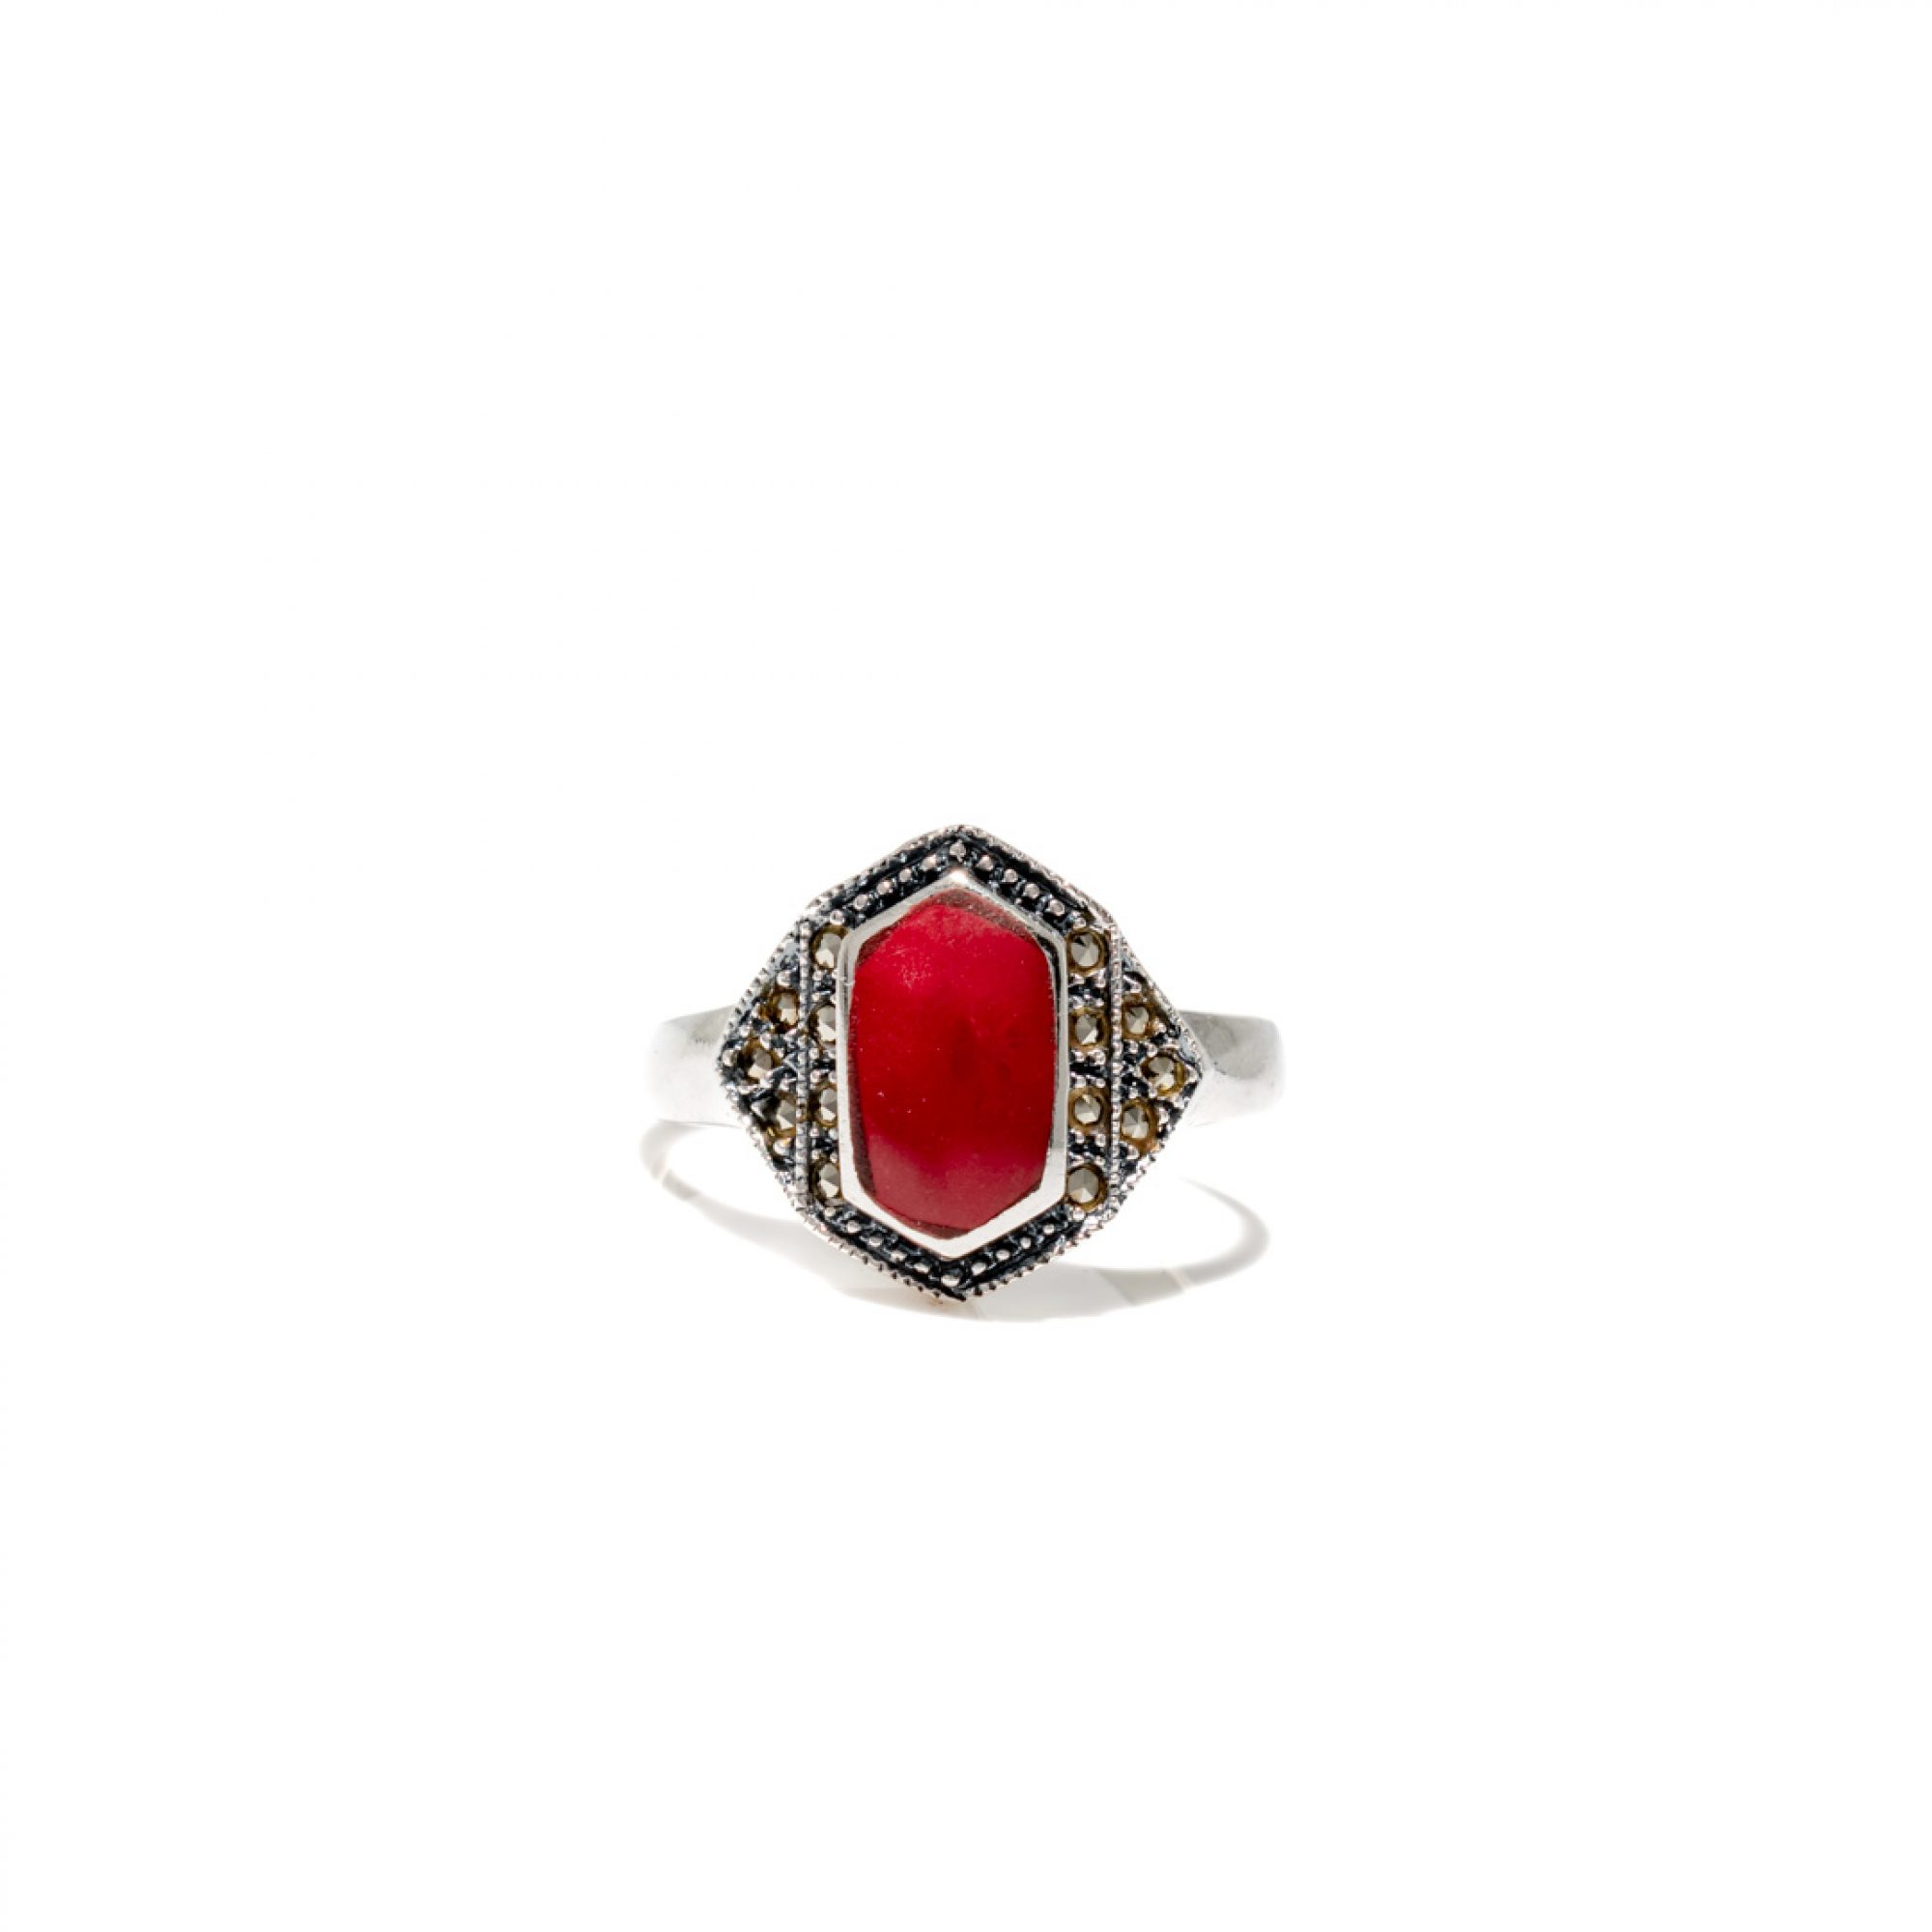 Ring with coral stone and marcasites